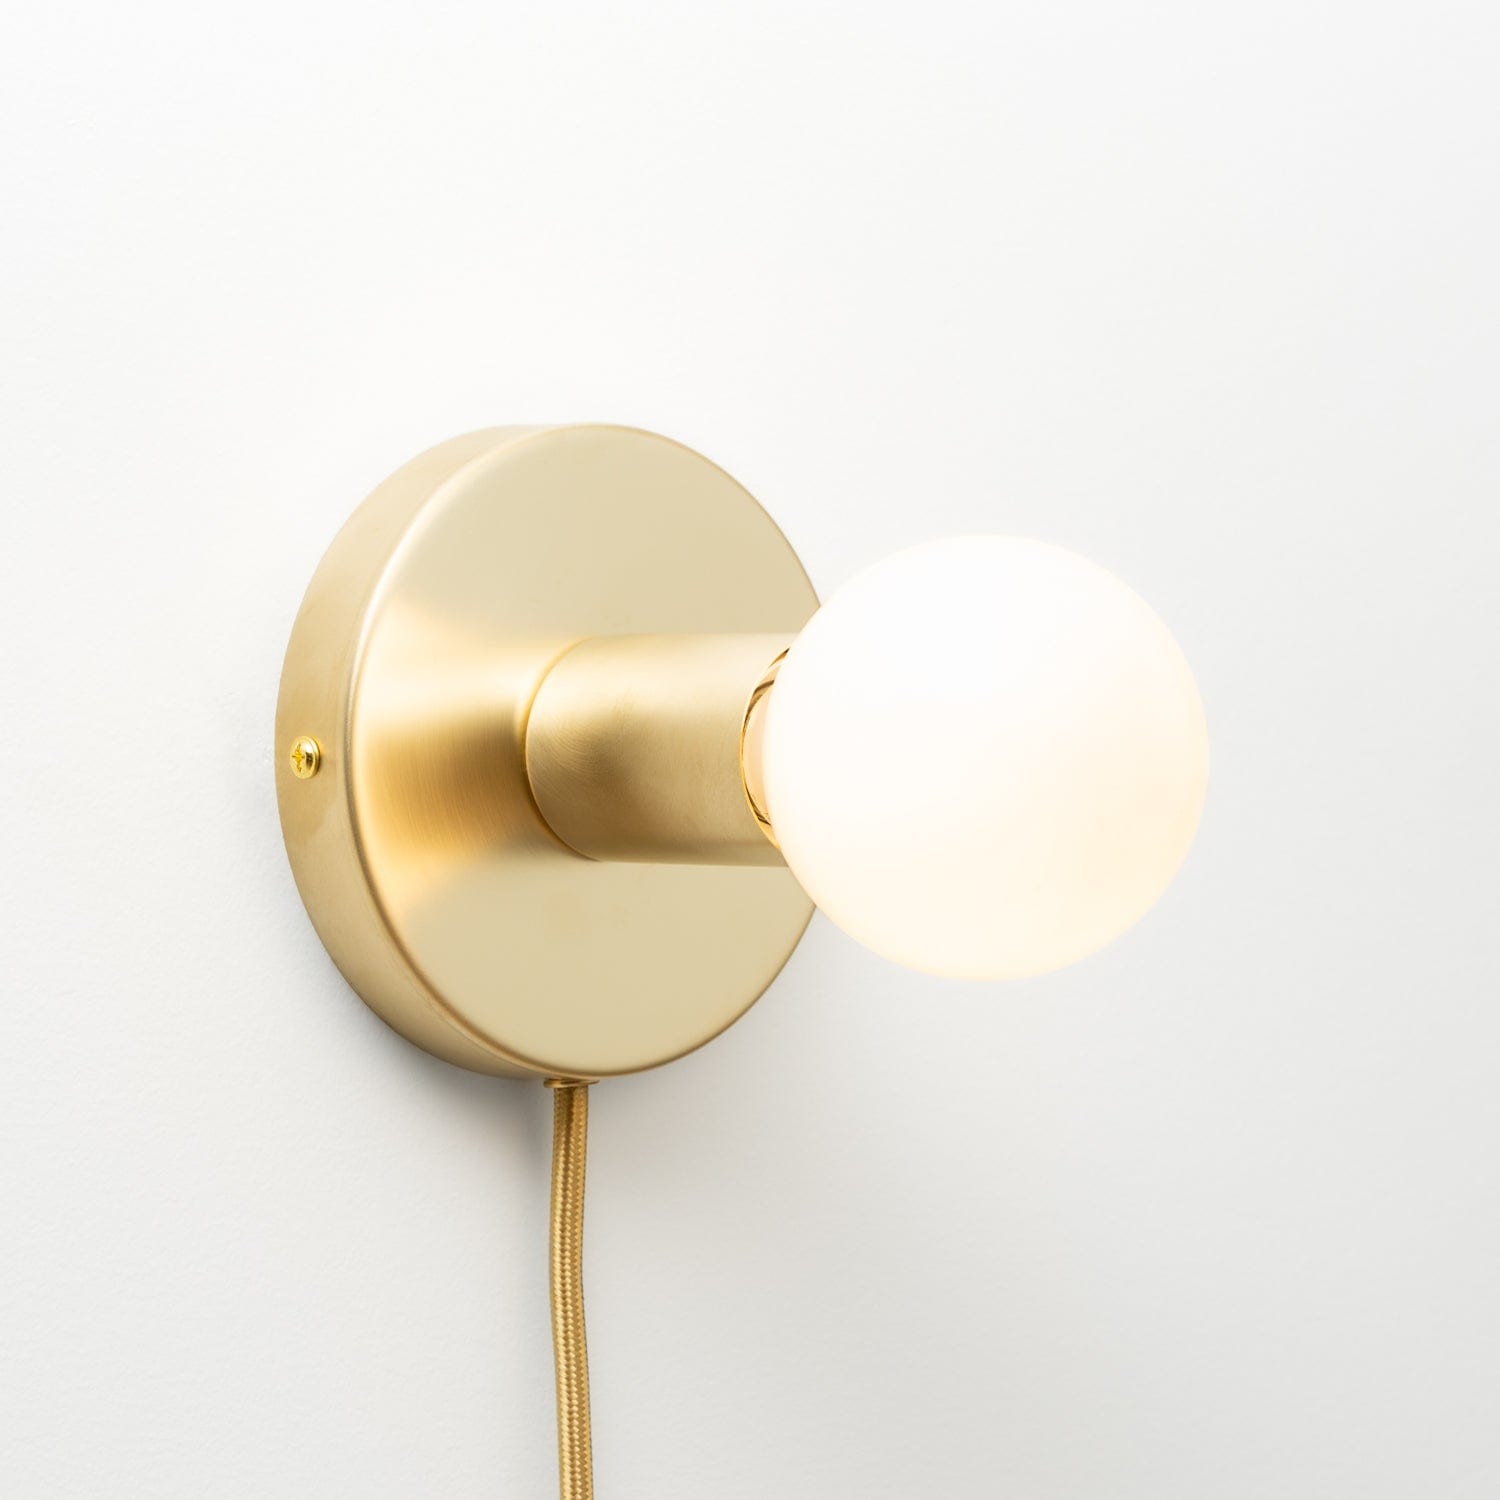 Button Plug-In Sconce in Raw Brass finish. Pictured with G25 light bulb.